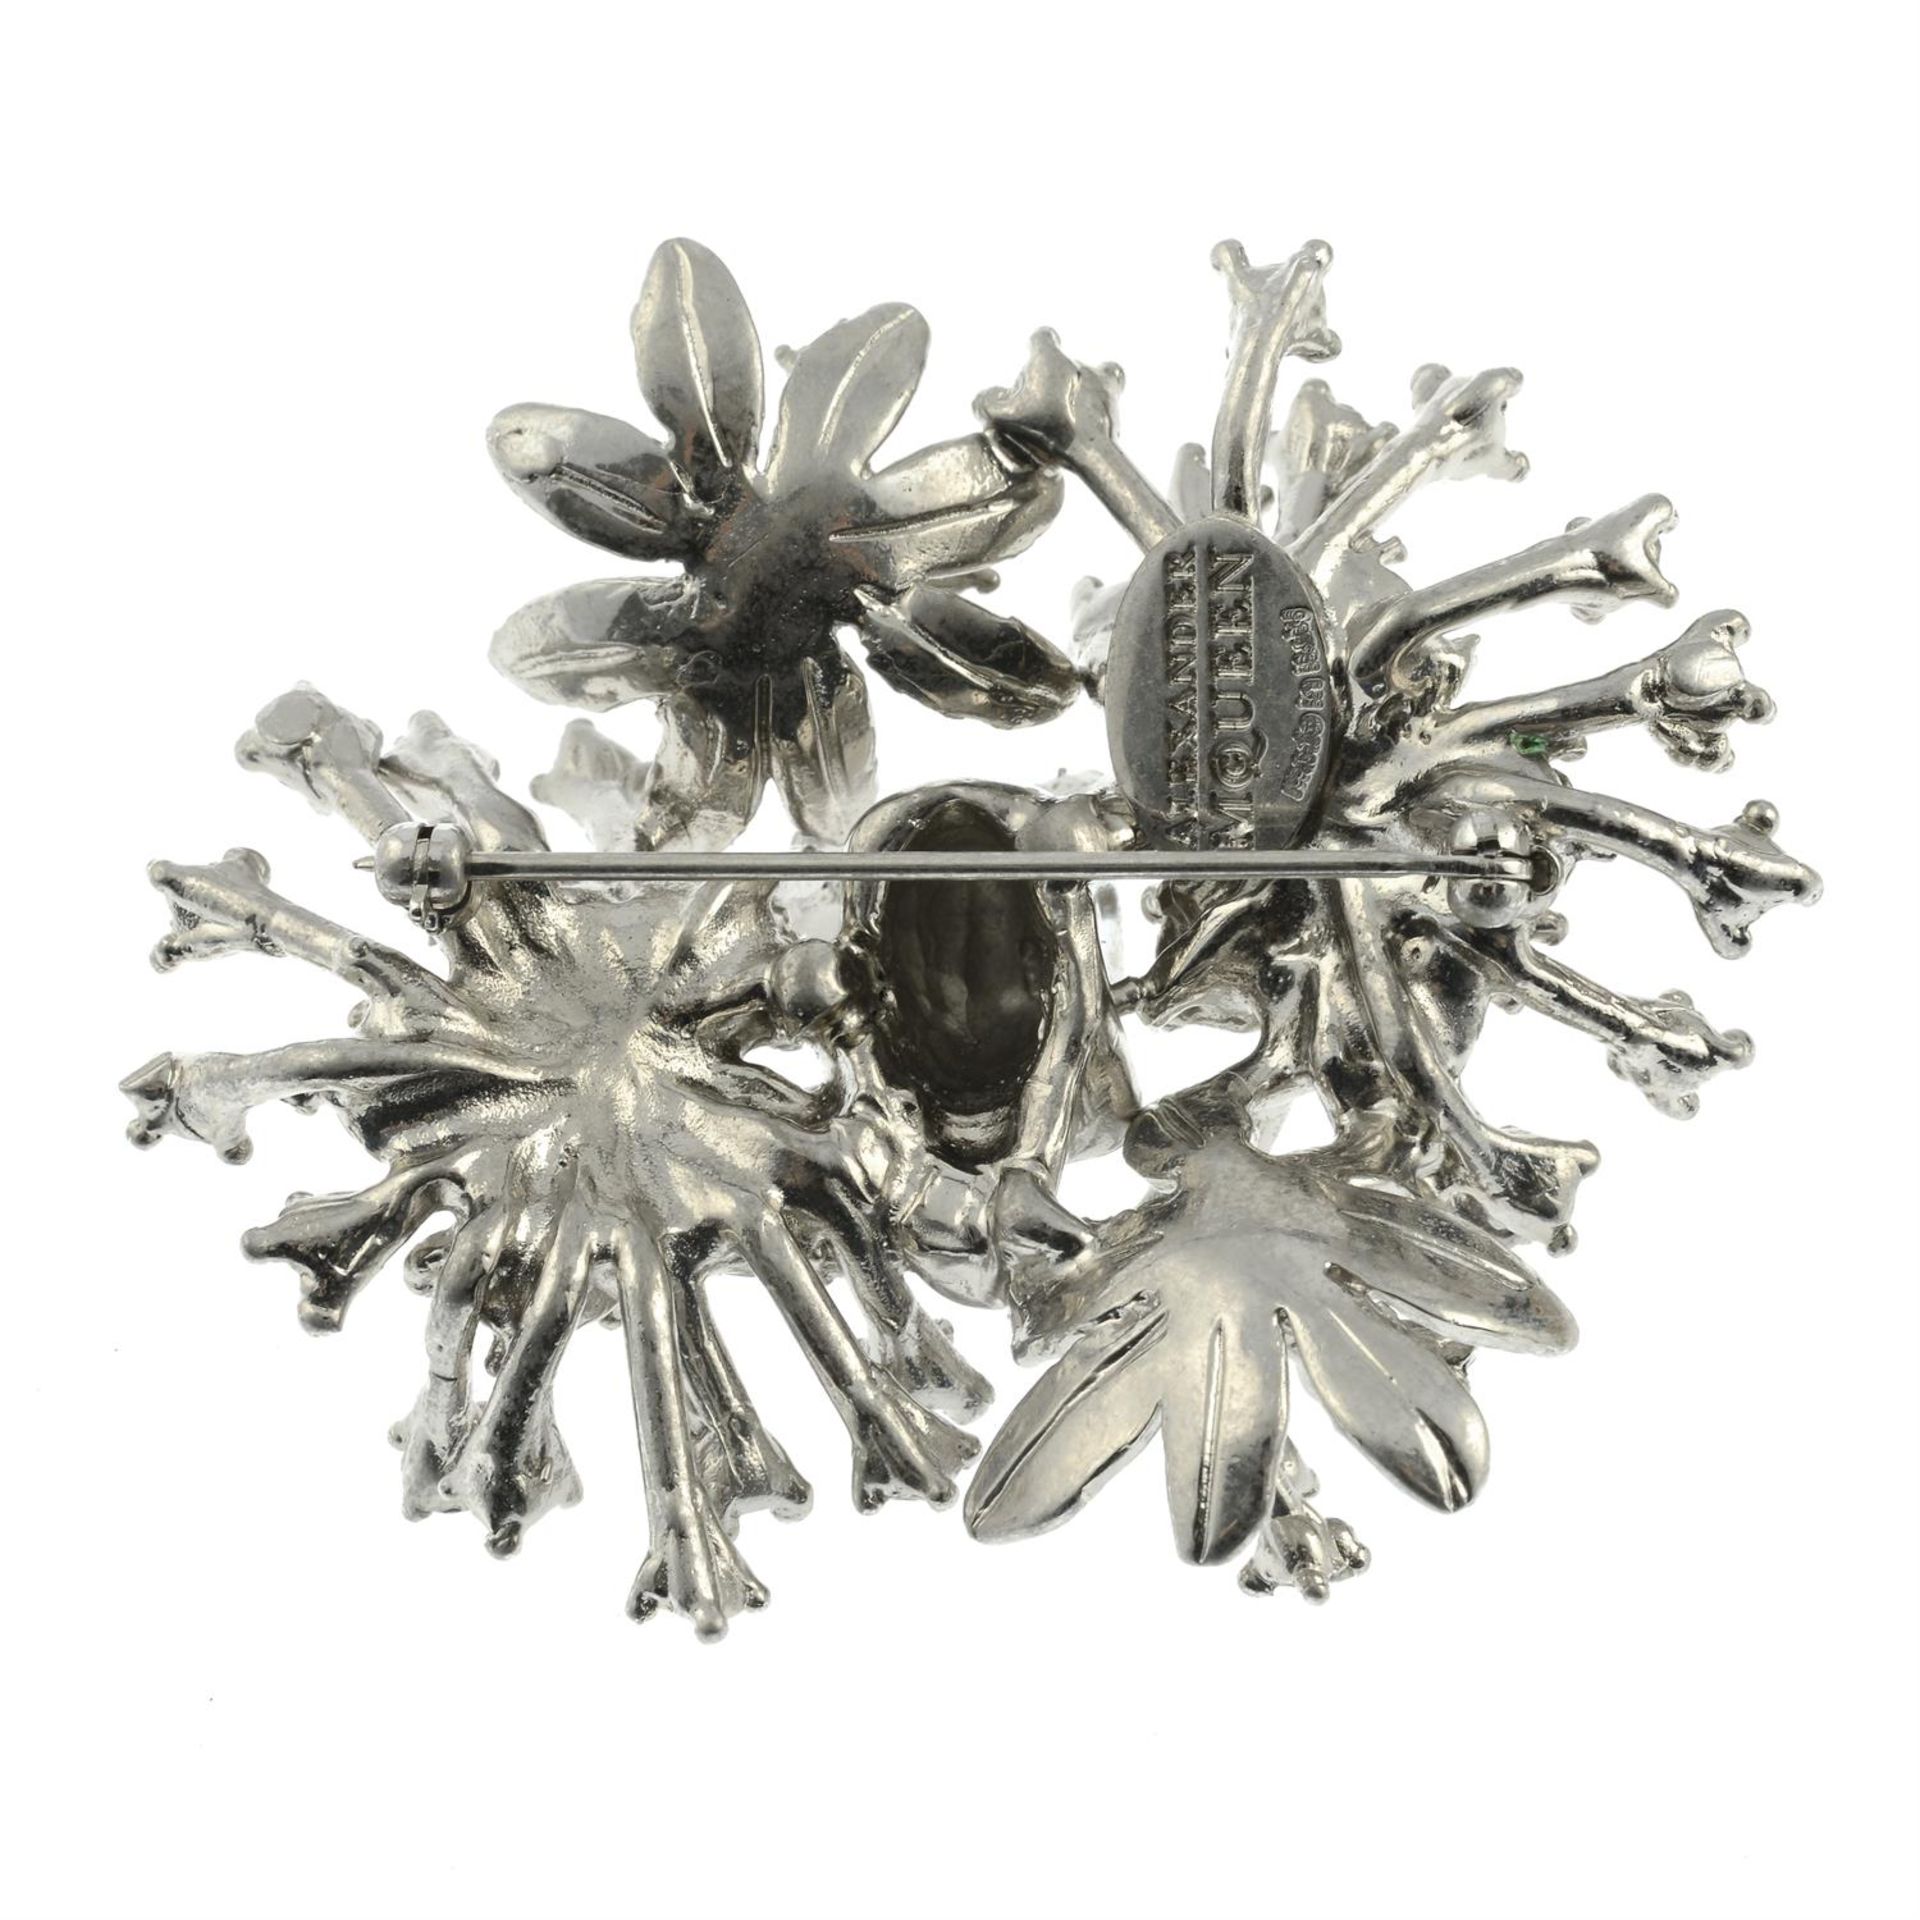 ALEXANDER MCQUEEN - a colourless paste skull and floral spray brooch. - Image 2 of 2